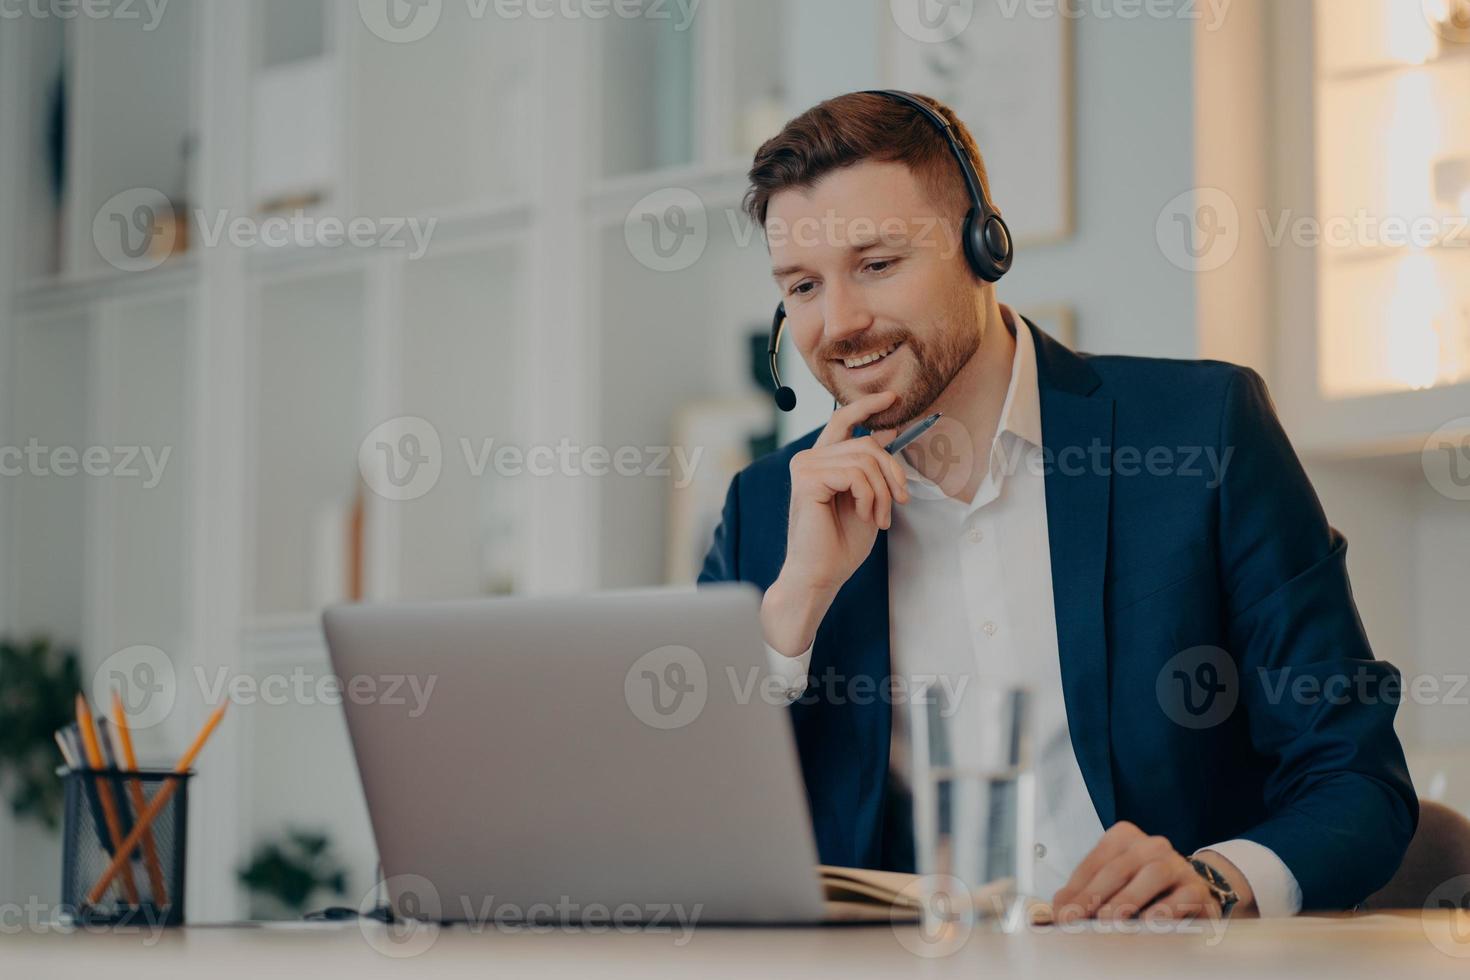 Professional male operator works in callcenter uses headset and laptop computer talks on video call or virtual webcam event wears formal clothes poses against cozy interior has online meeting photo